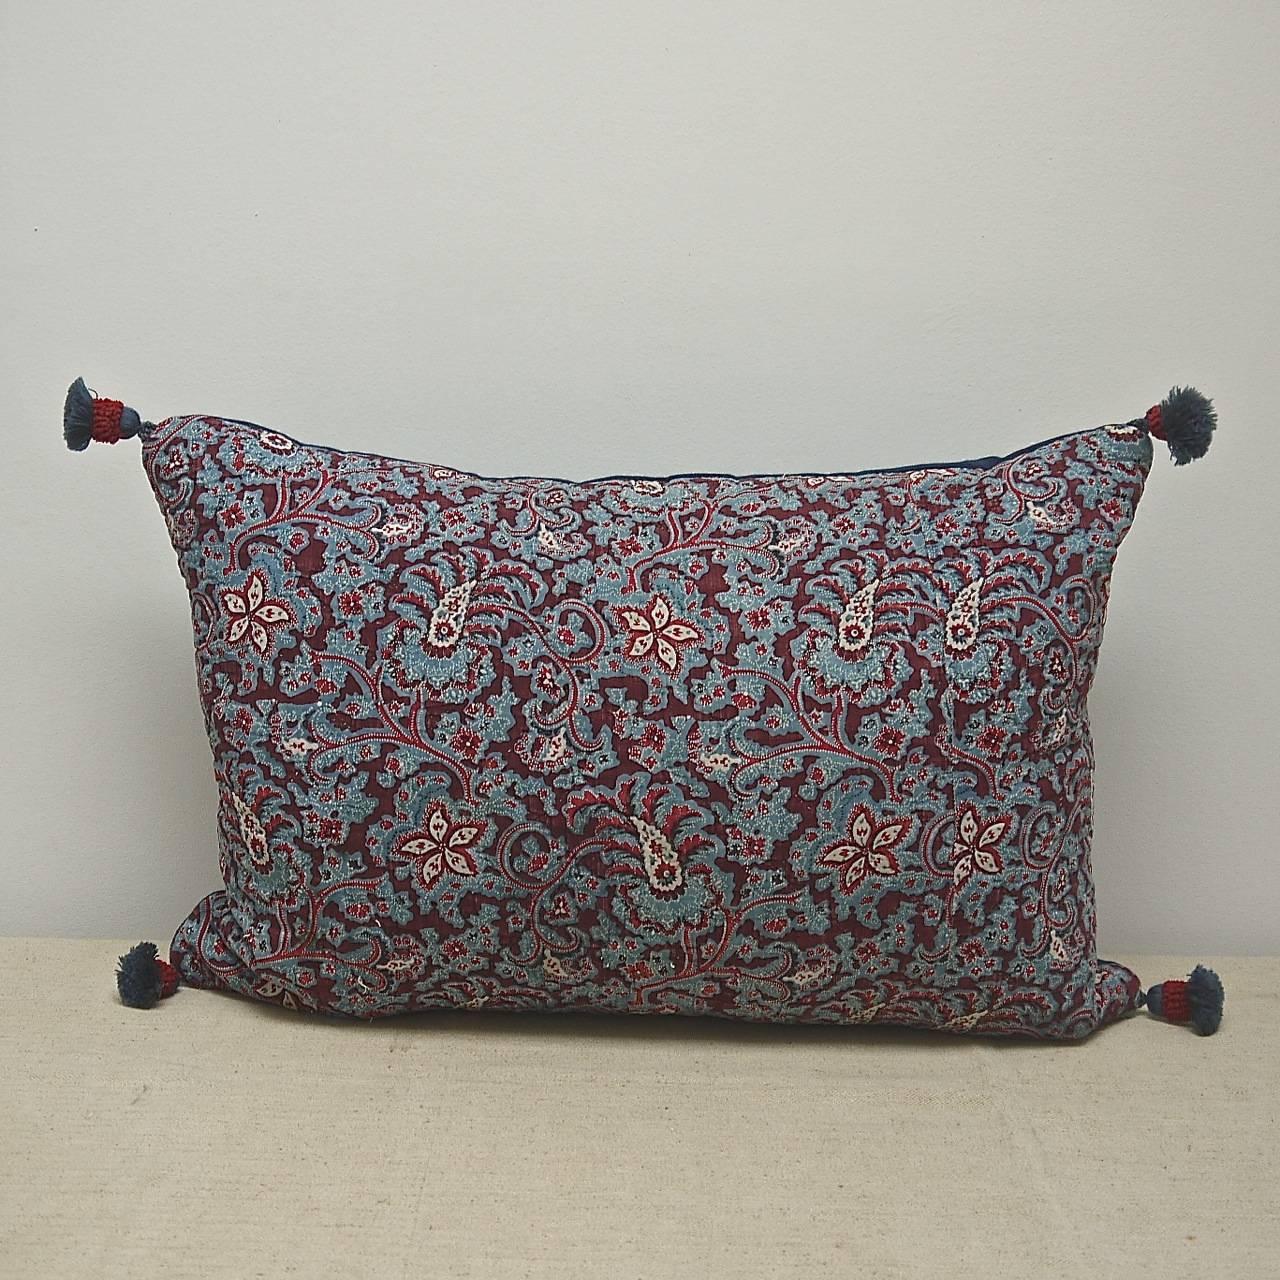 Early 19th century, French block printed cotton cushion in shades of blue and mauve.
With 19th century, French wool tassels on each corner. Slip-stitched close with a duck feather insert.